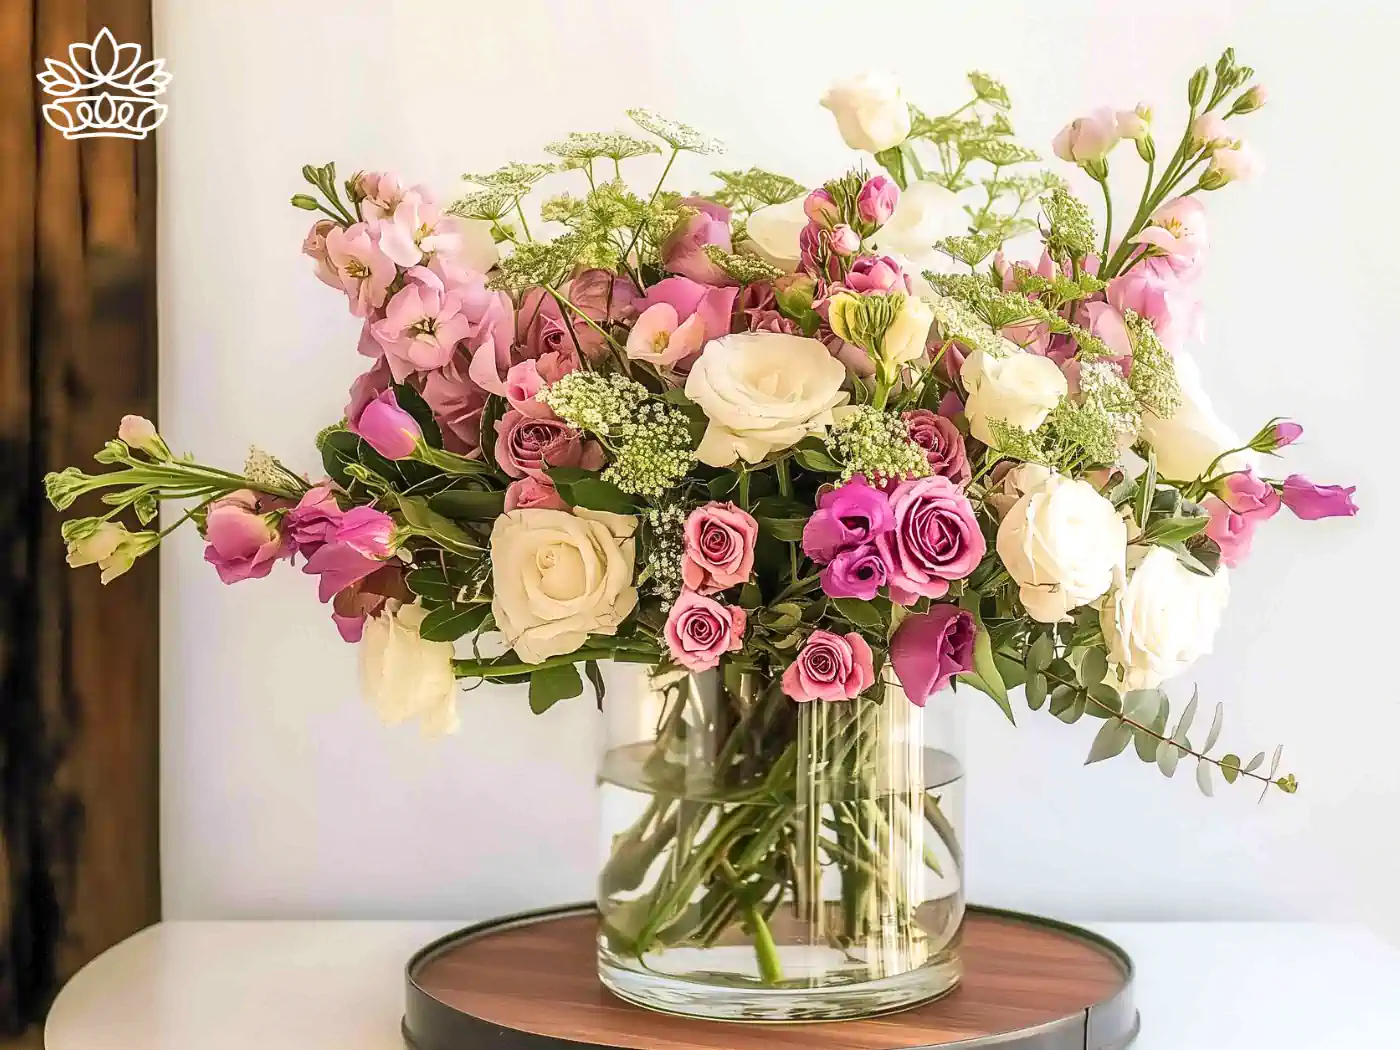 A beautifully arranged bouquet featuring an assortment of white and pink roses, delicate lavender blooms, and lush greenery, elegantly displayed in a clear glass vase on a wooden surface. This floral arrangement exudes charm and sophistication, perfect for enhancing any space. All Flower Arrangements Collection. Fabulous Flowers and Gifts.